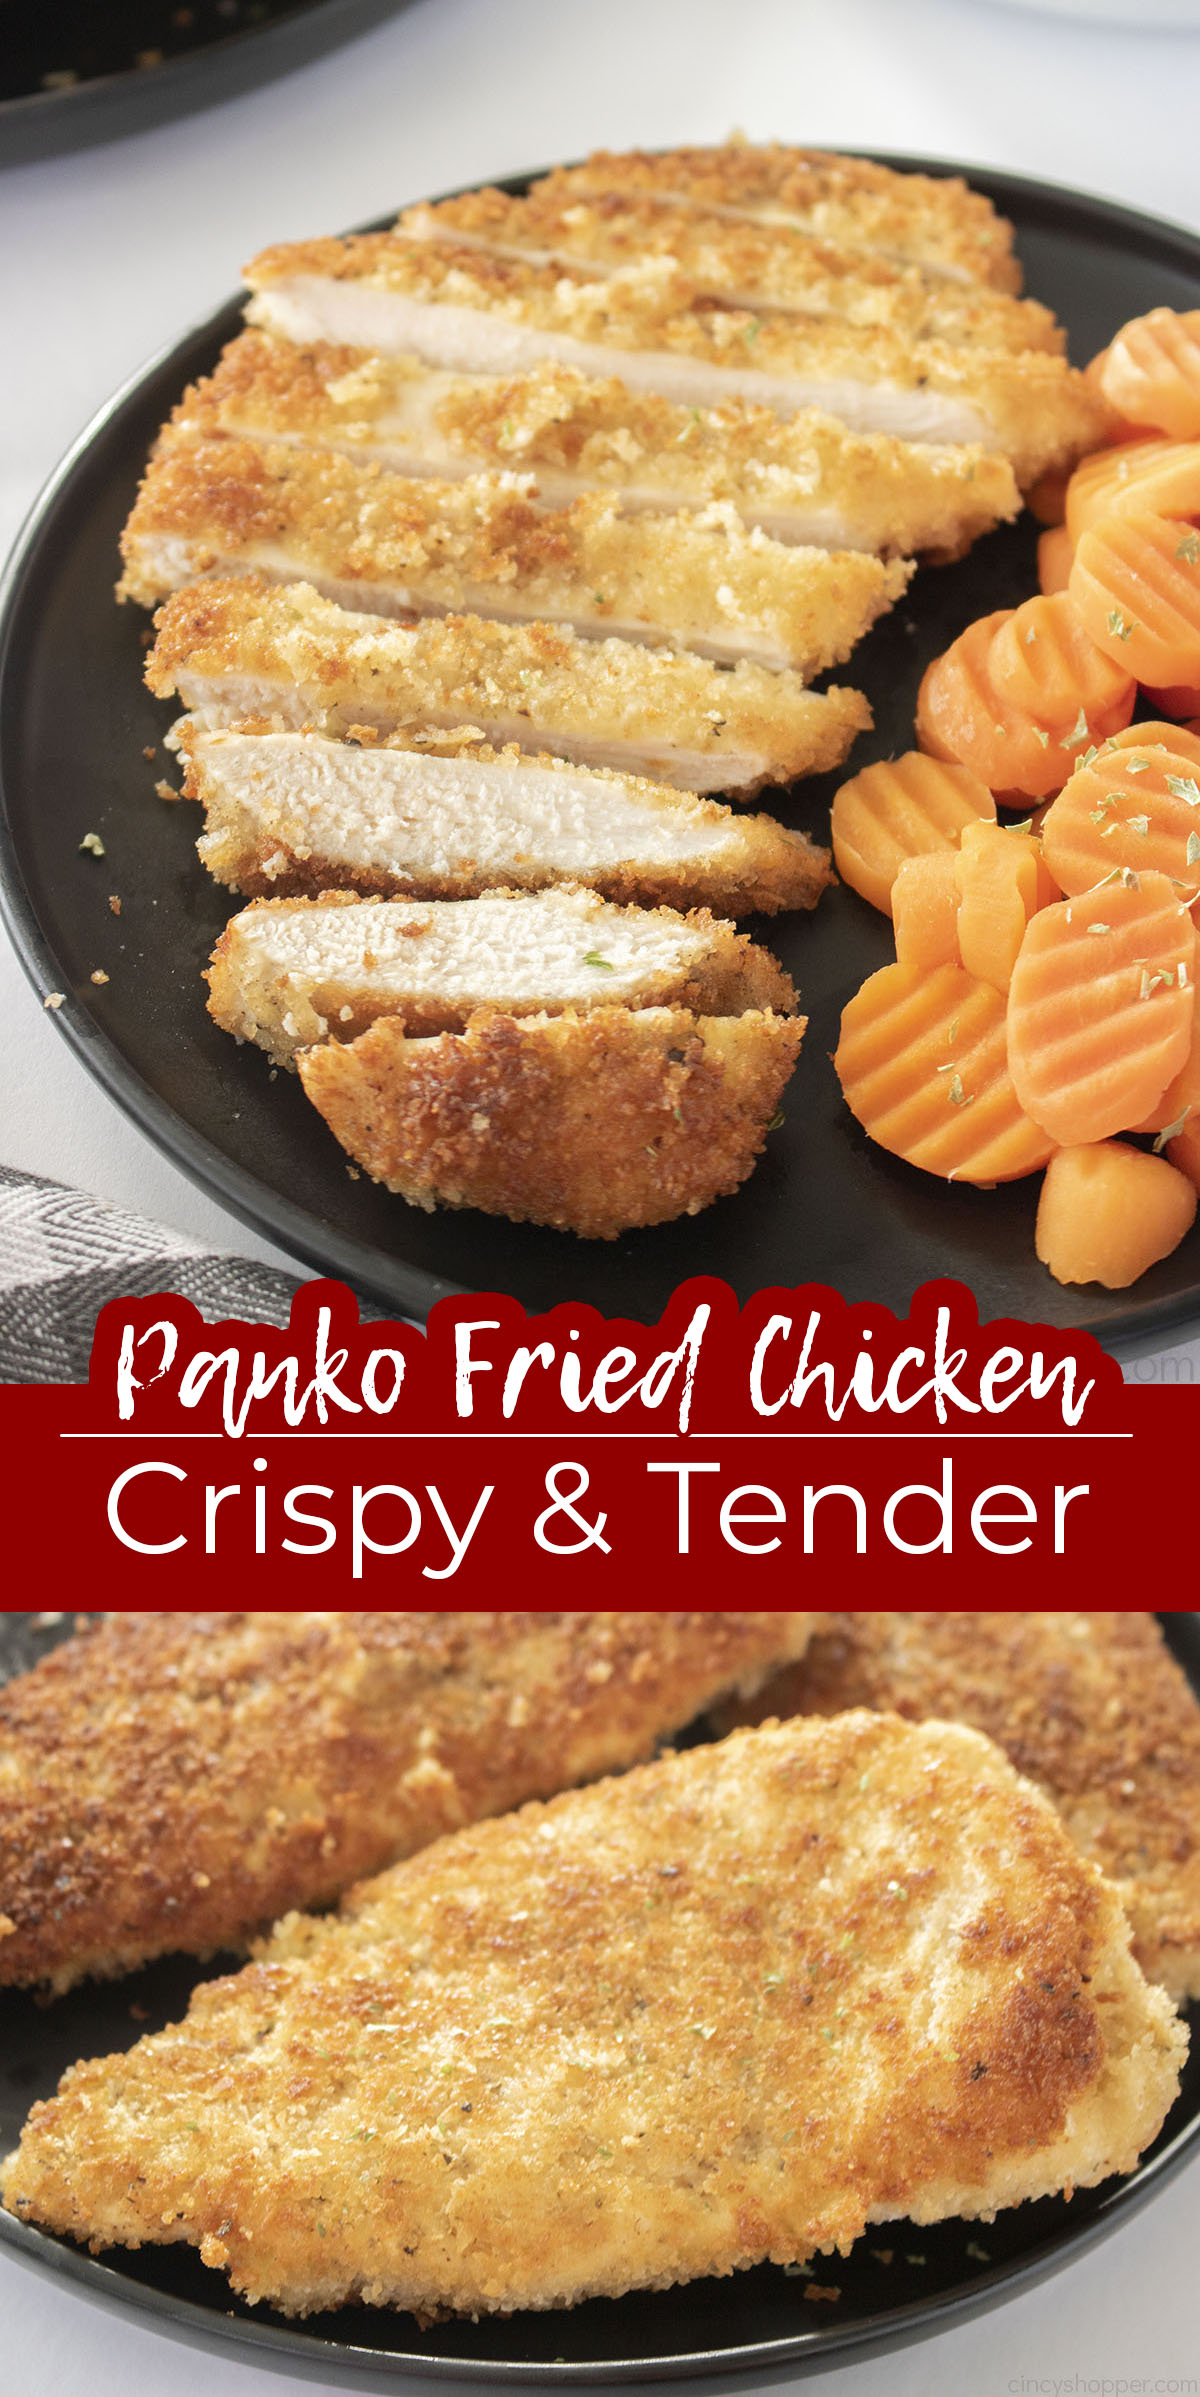 Text on image Panko Fried Chicken Crispy and Tender.